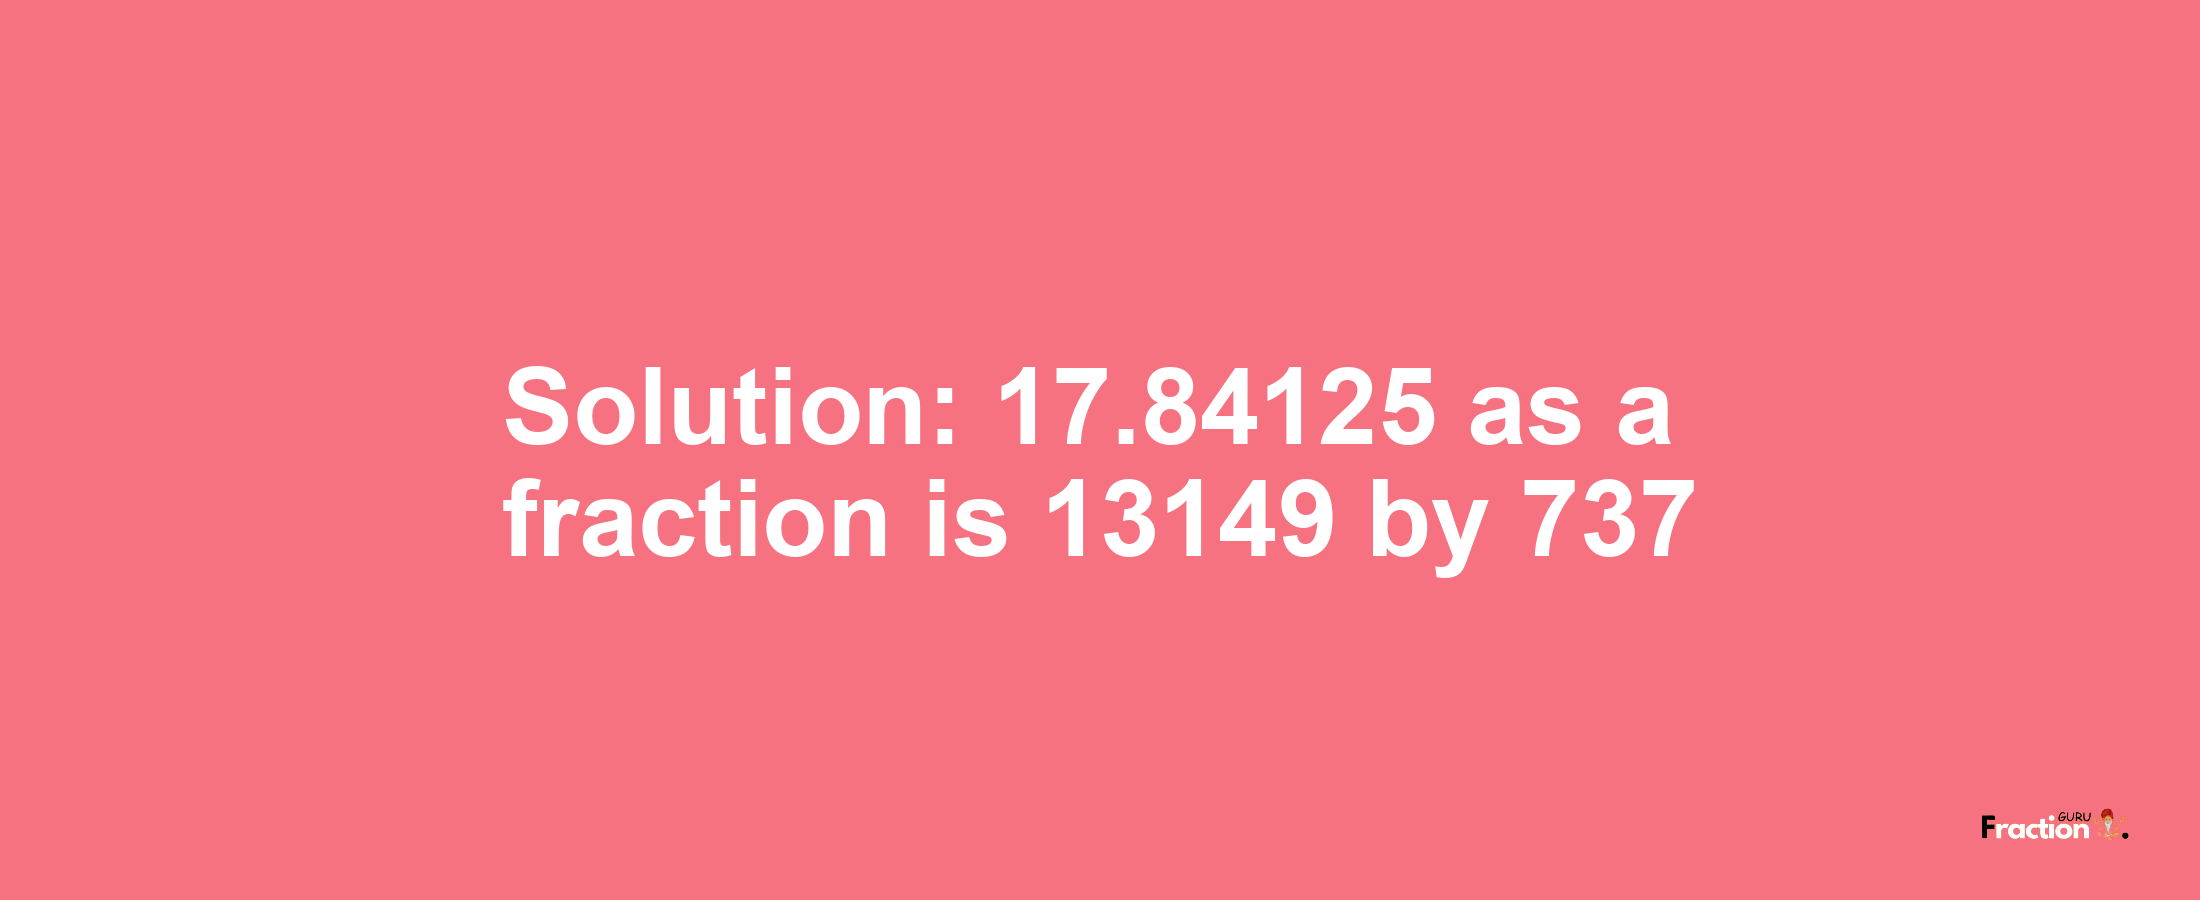 Solution:17.84125 as a fraction is 13149/737